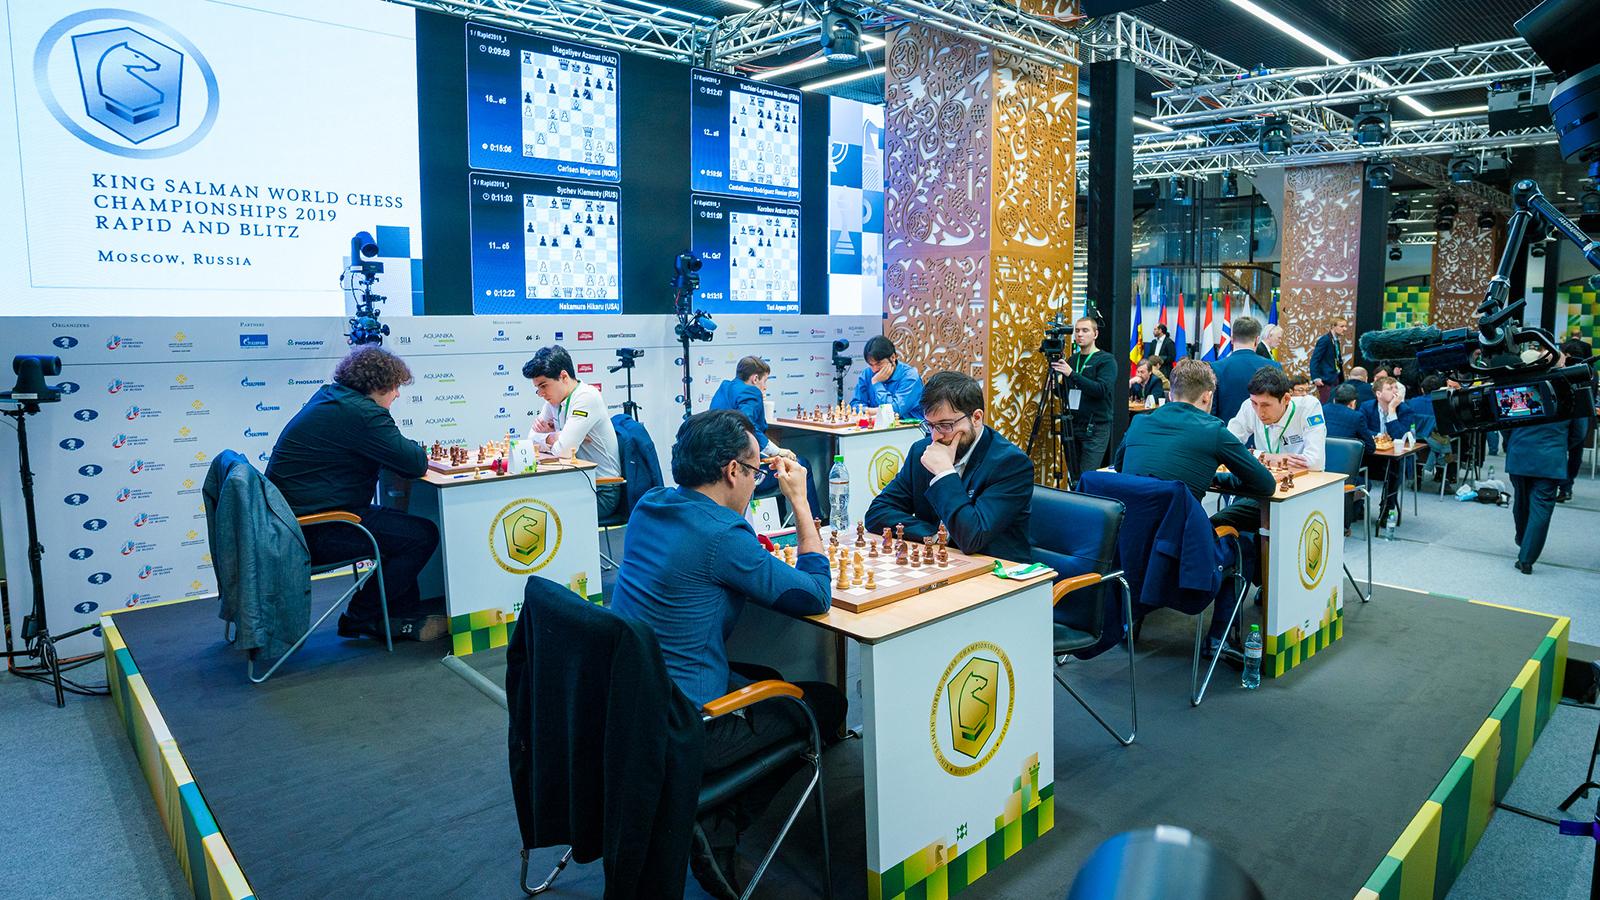 A fantastic game by Czech GM Laznicka in the World Chess Rapid